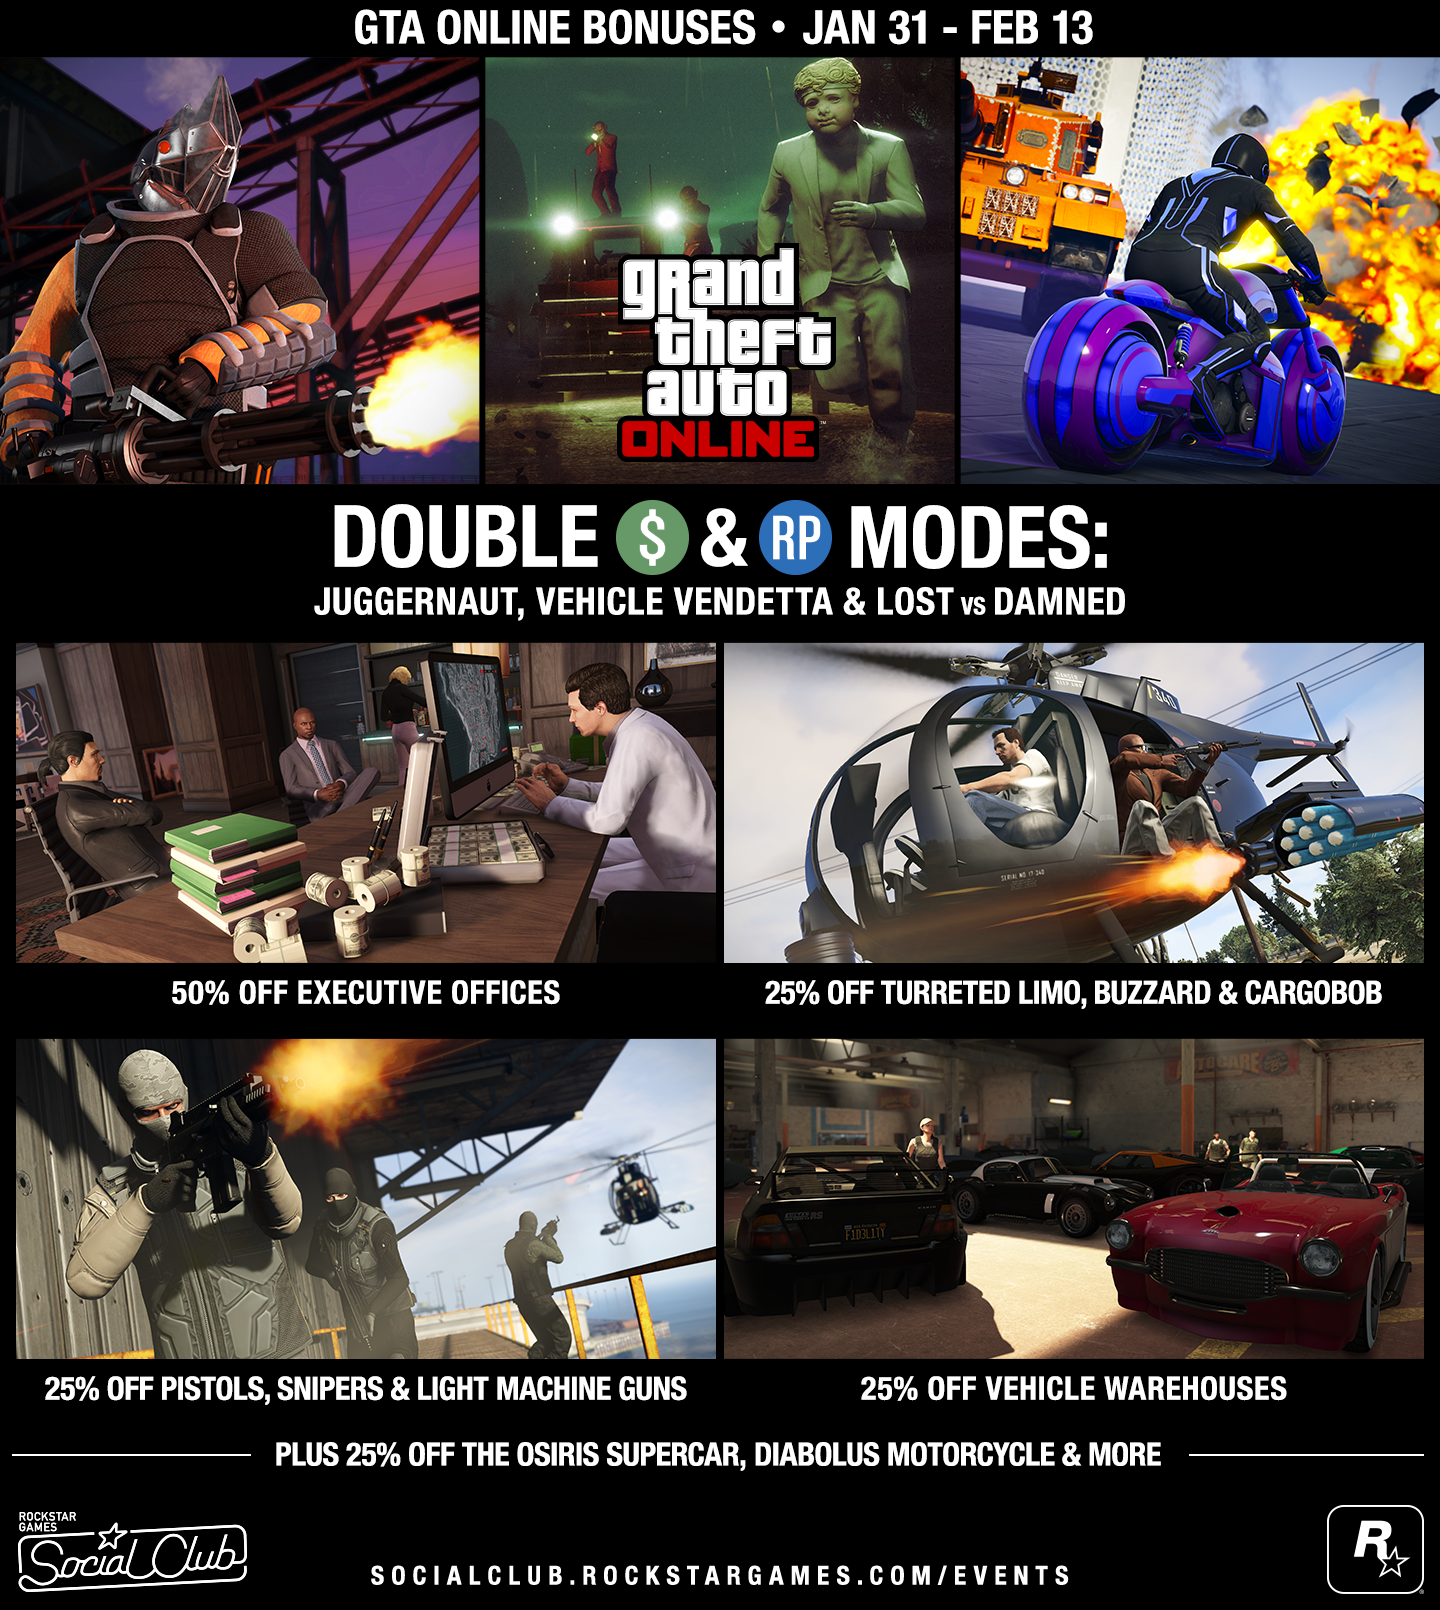 Gta Online Double Gta Modes Executive Office Sale Last Chance To Transfer Your Character More Rockstar Games